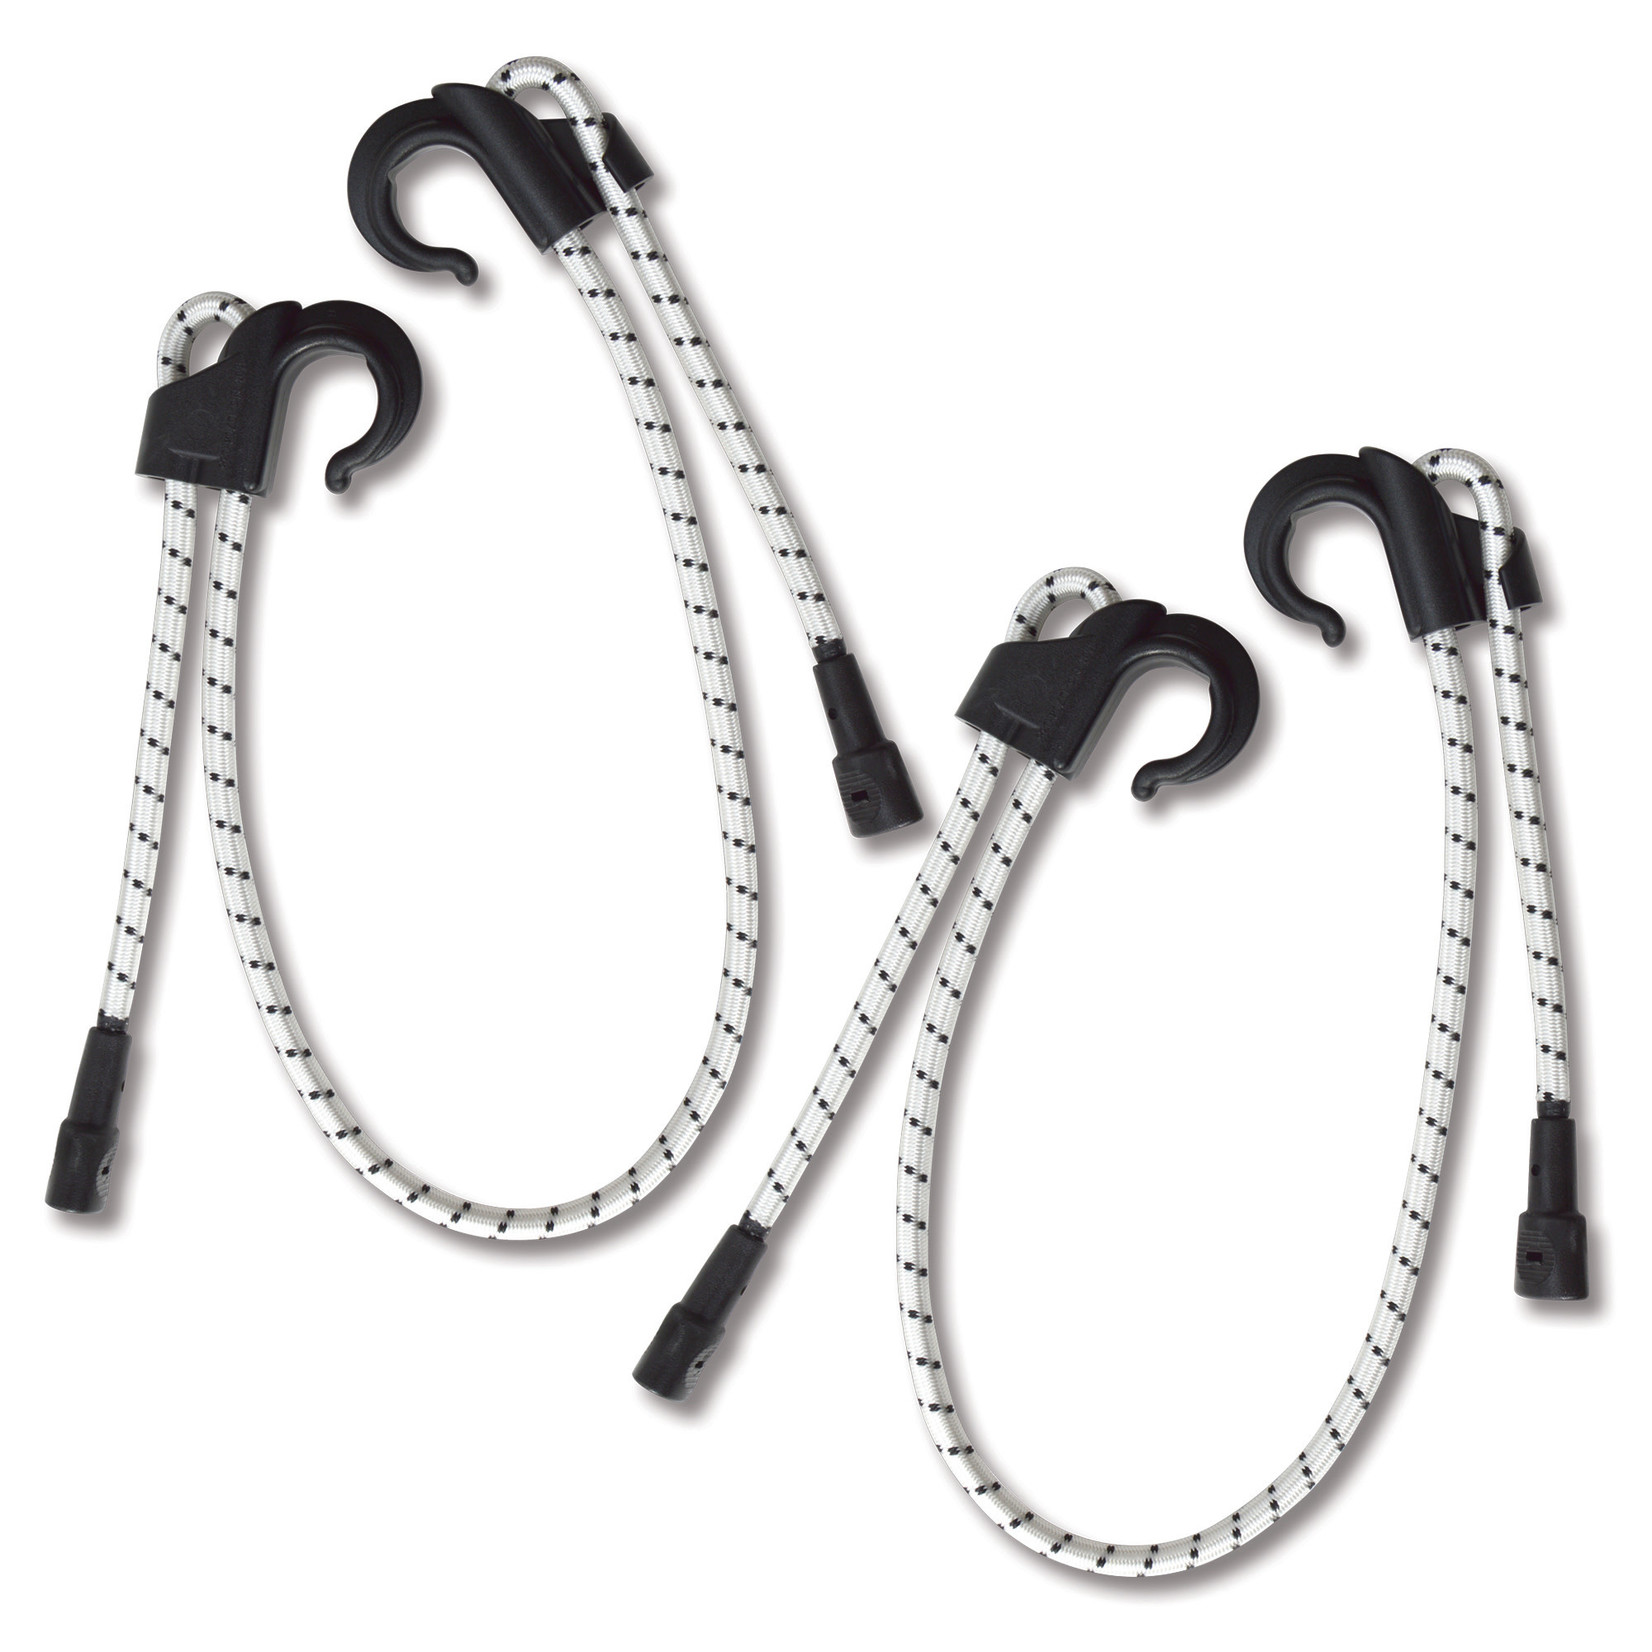 Twins Gallery Plastic Hook Bungee Cord / Flexible Bungee Rope Bungee Cord  Price in India - Buy Twins Gallery Plastic Hook Bungee Cord / Flexible  Bungee Rope Bungee Cord online at